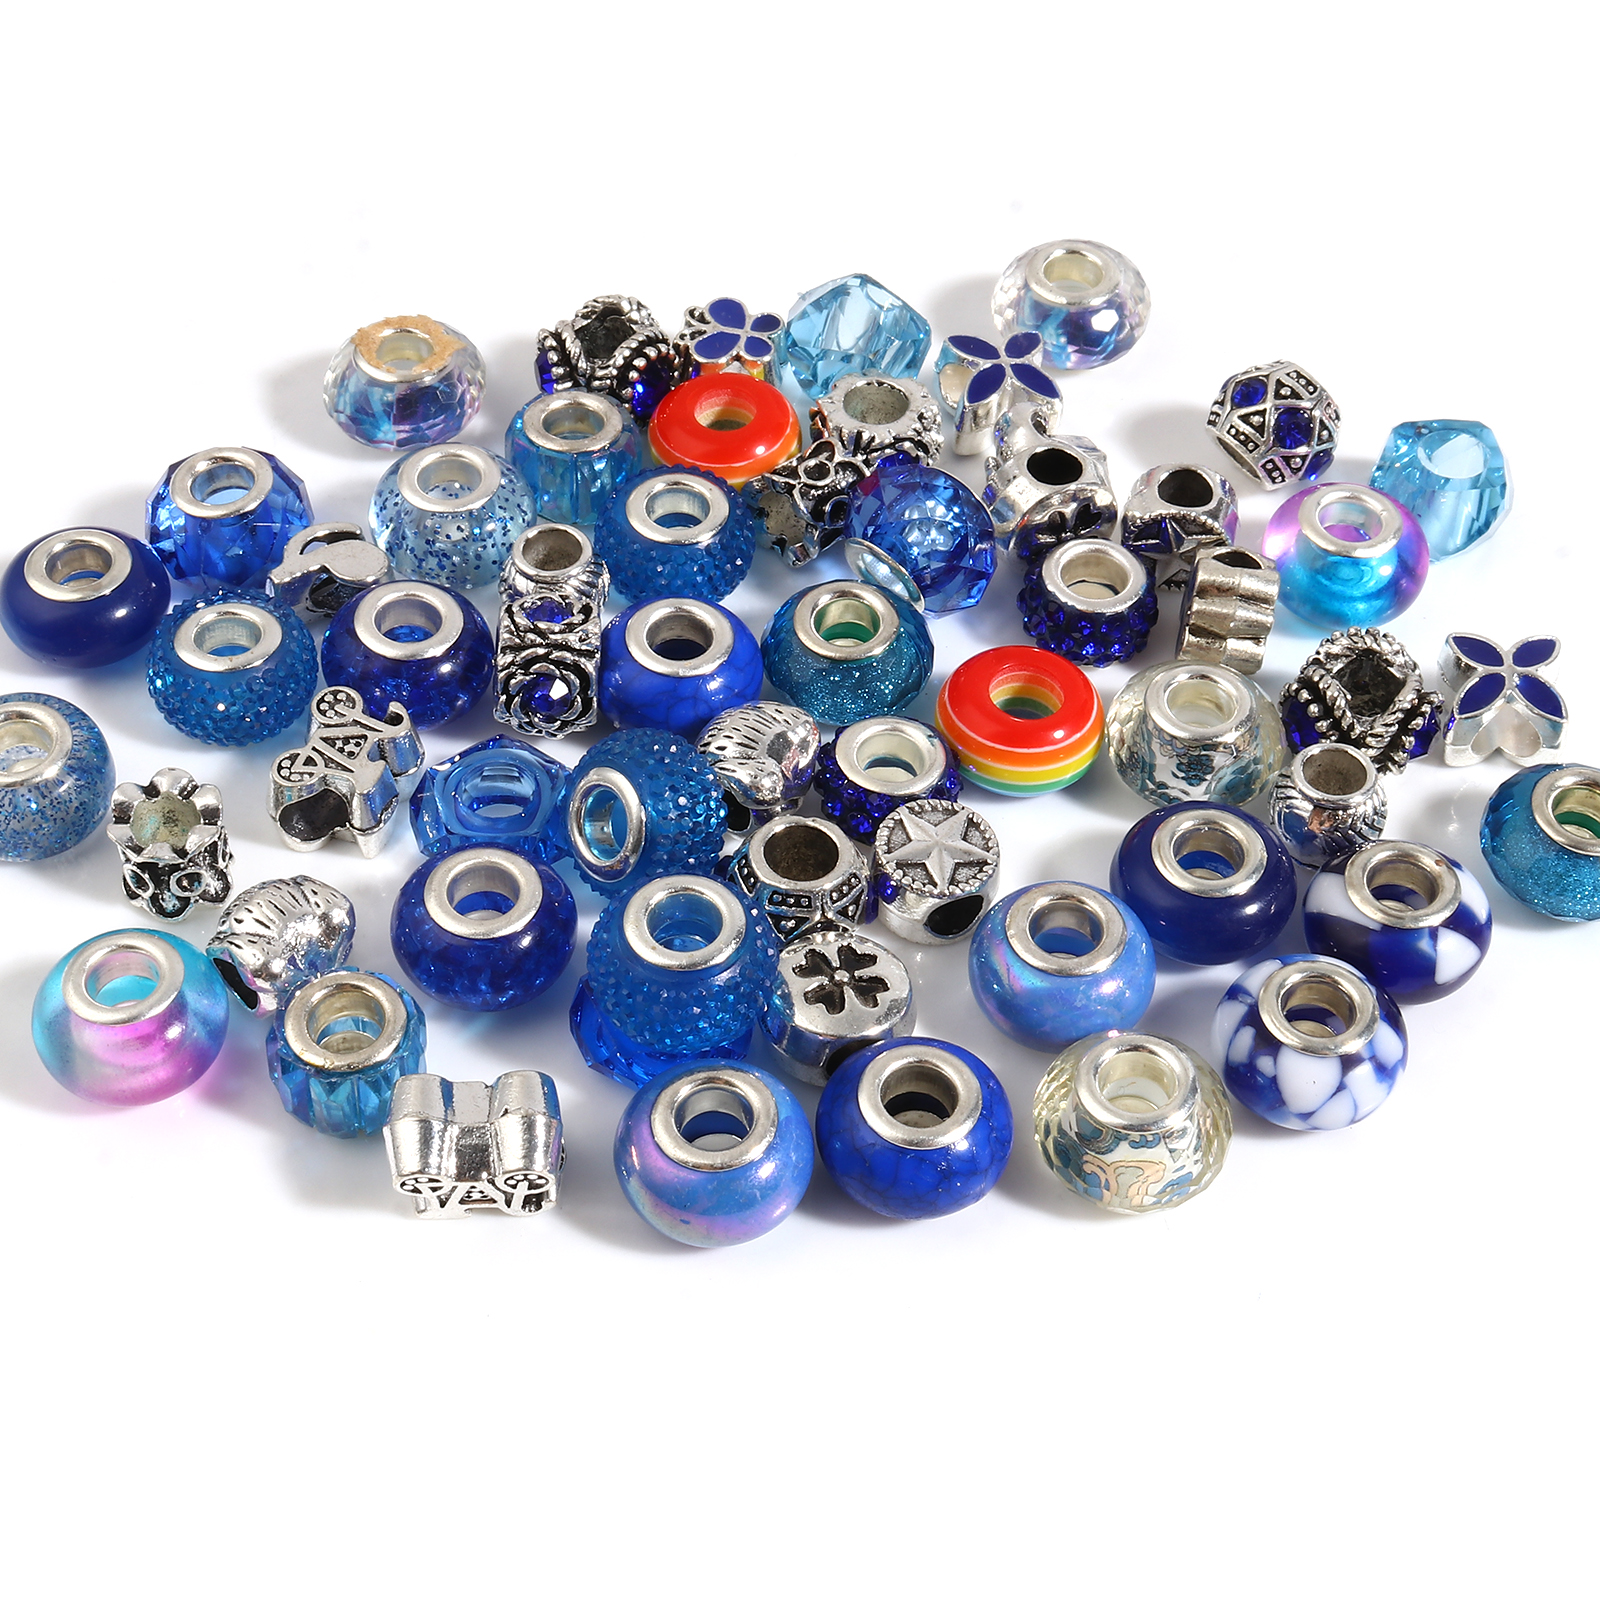 Picture of Zinc Based Alloy & Acrylic Large Hole Charm Beads Silver Tone Dark Blue Round At Random 14mm Dia., 9mm x 8mm, Hole: Approx 5.1mm - 4.5mm, 1 Set(60 Pcs/Set)